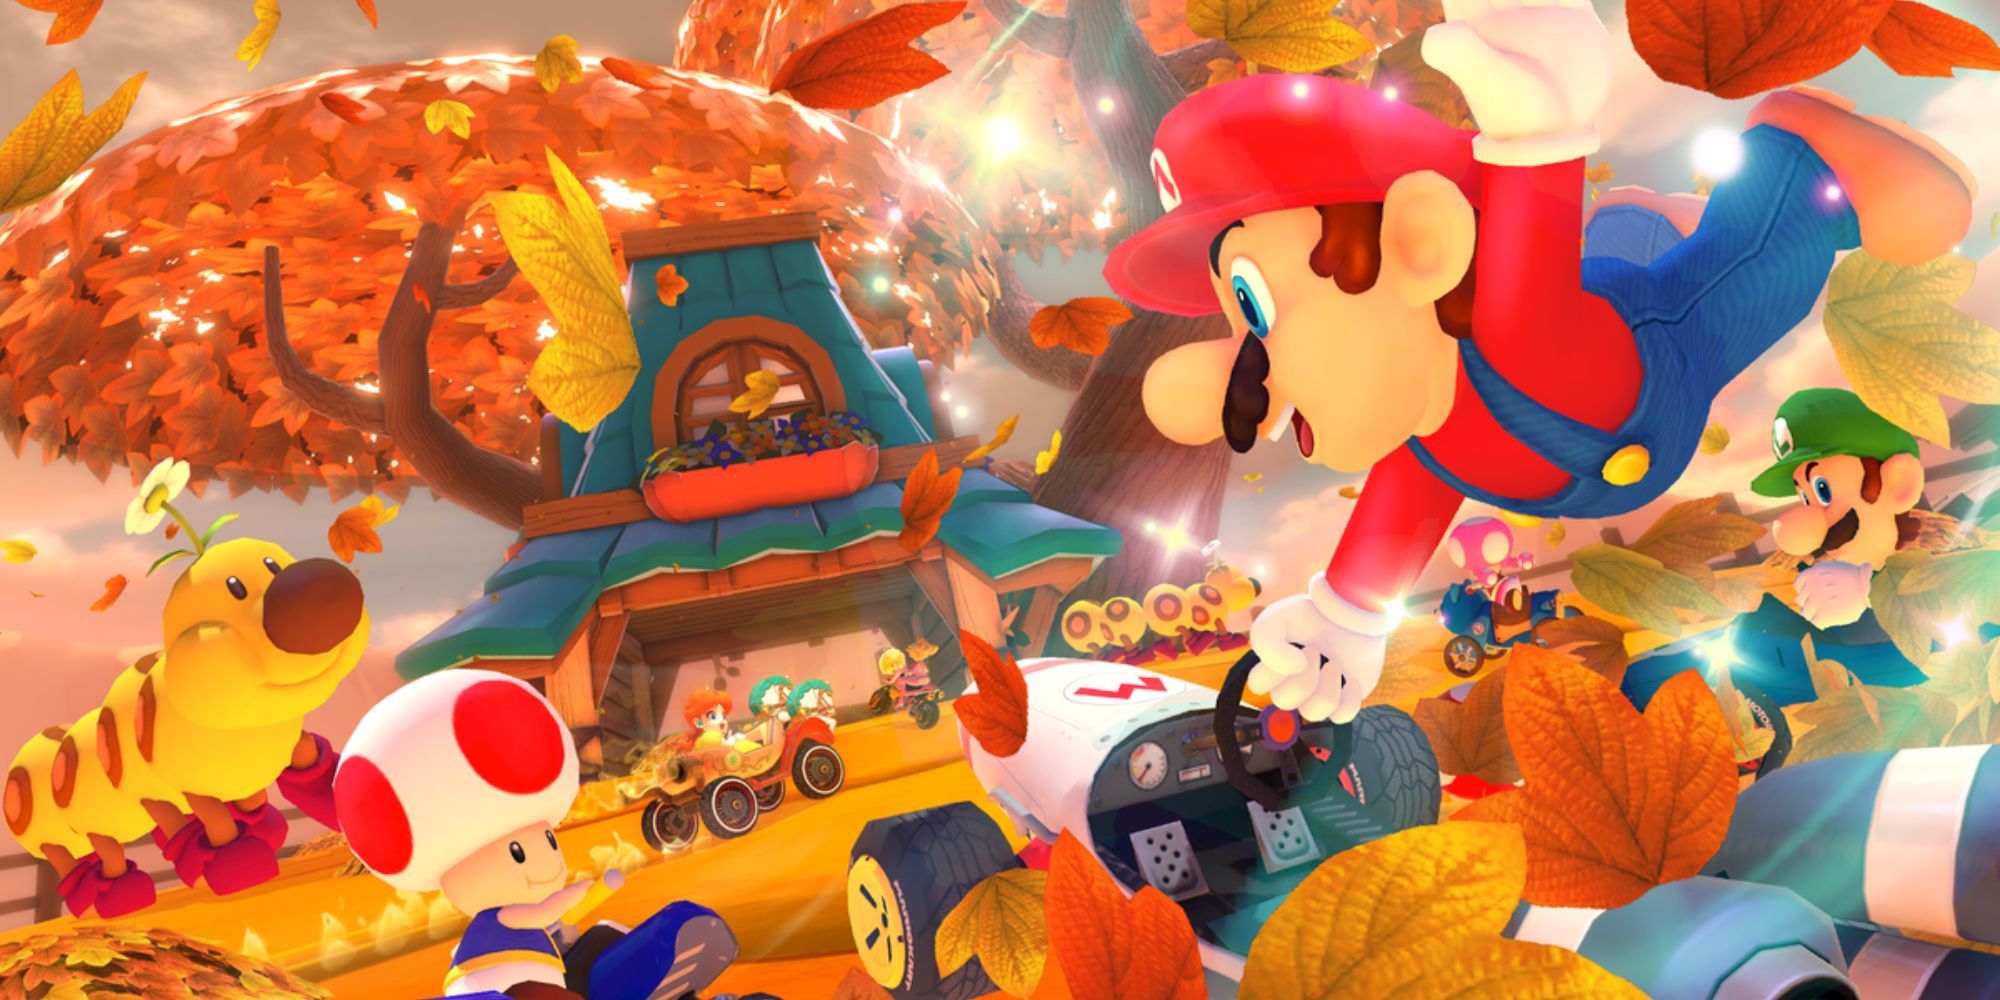 Mario Kart 8 Deluxe Rock Cup Mario and Toad race on Maple Treeway